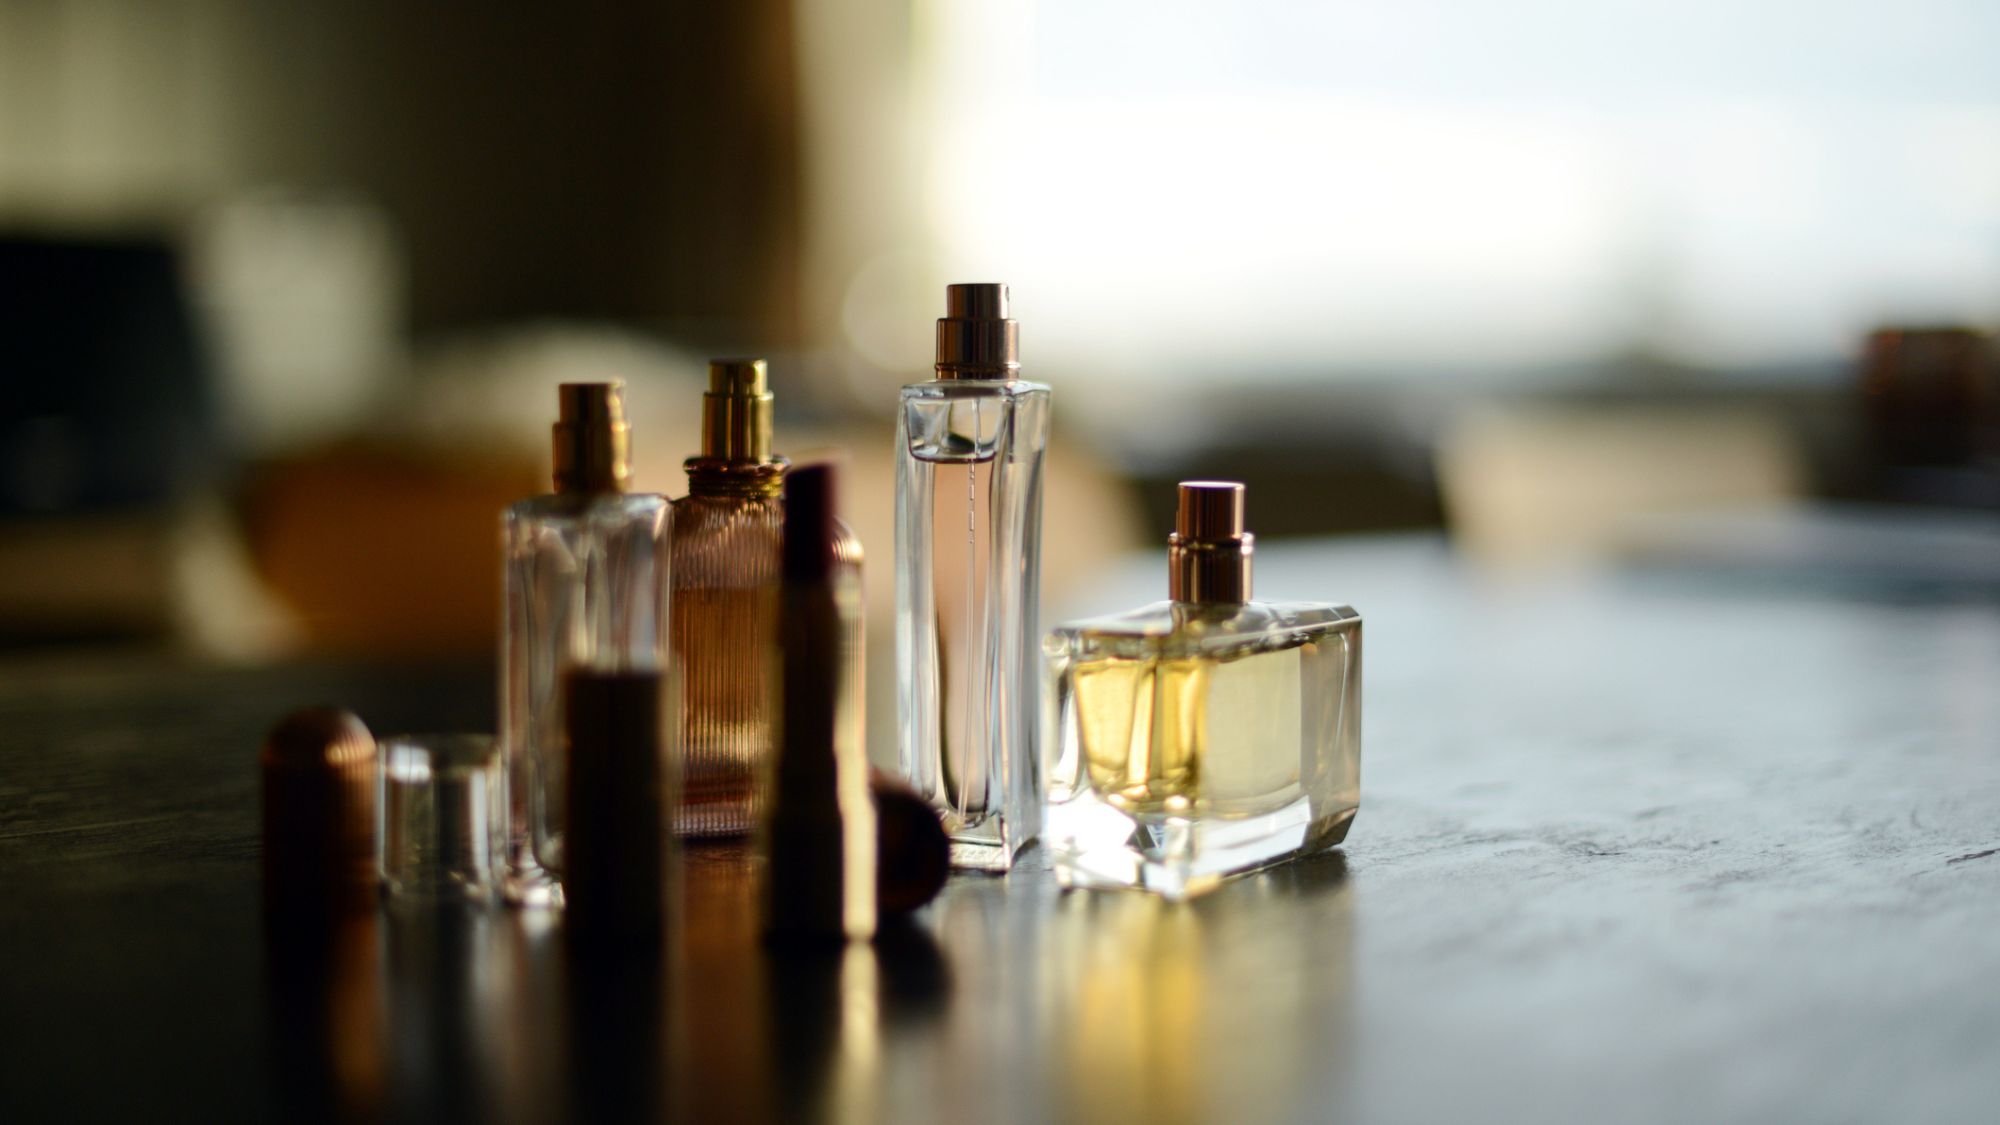 The 10 Best Zara Perfumes That Spritz an Air of Sophistication